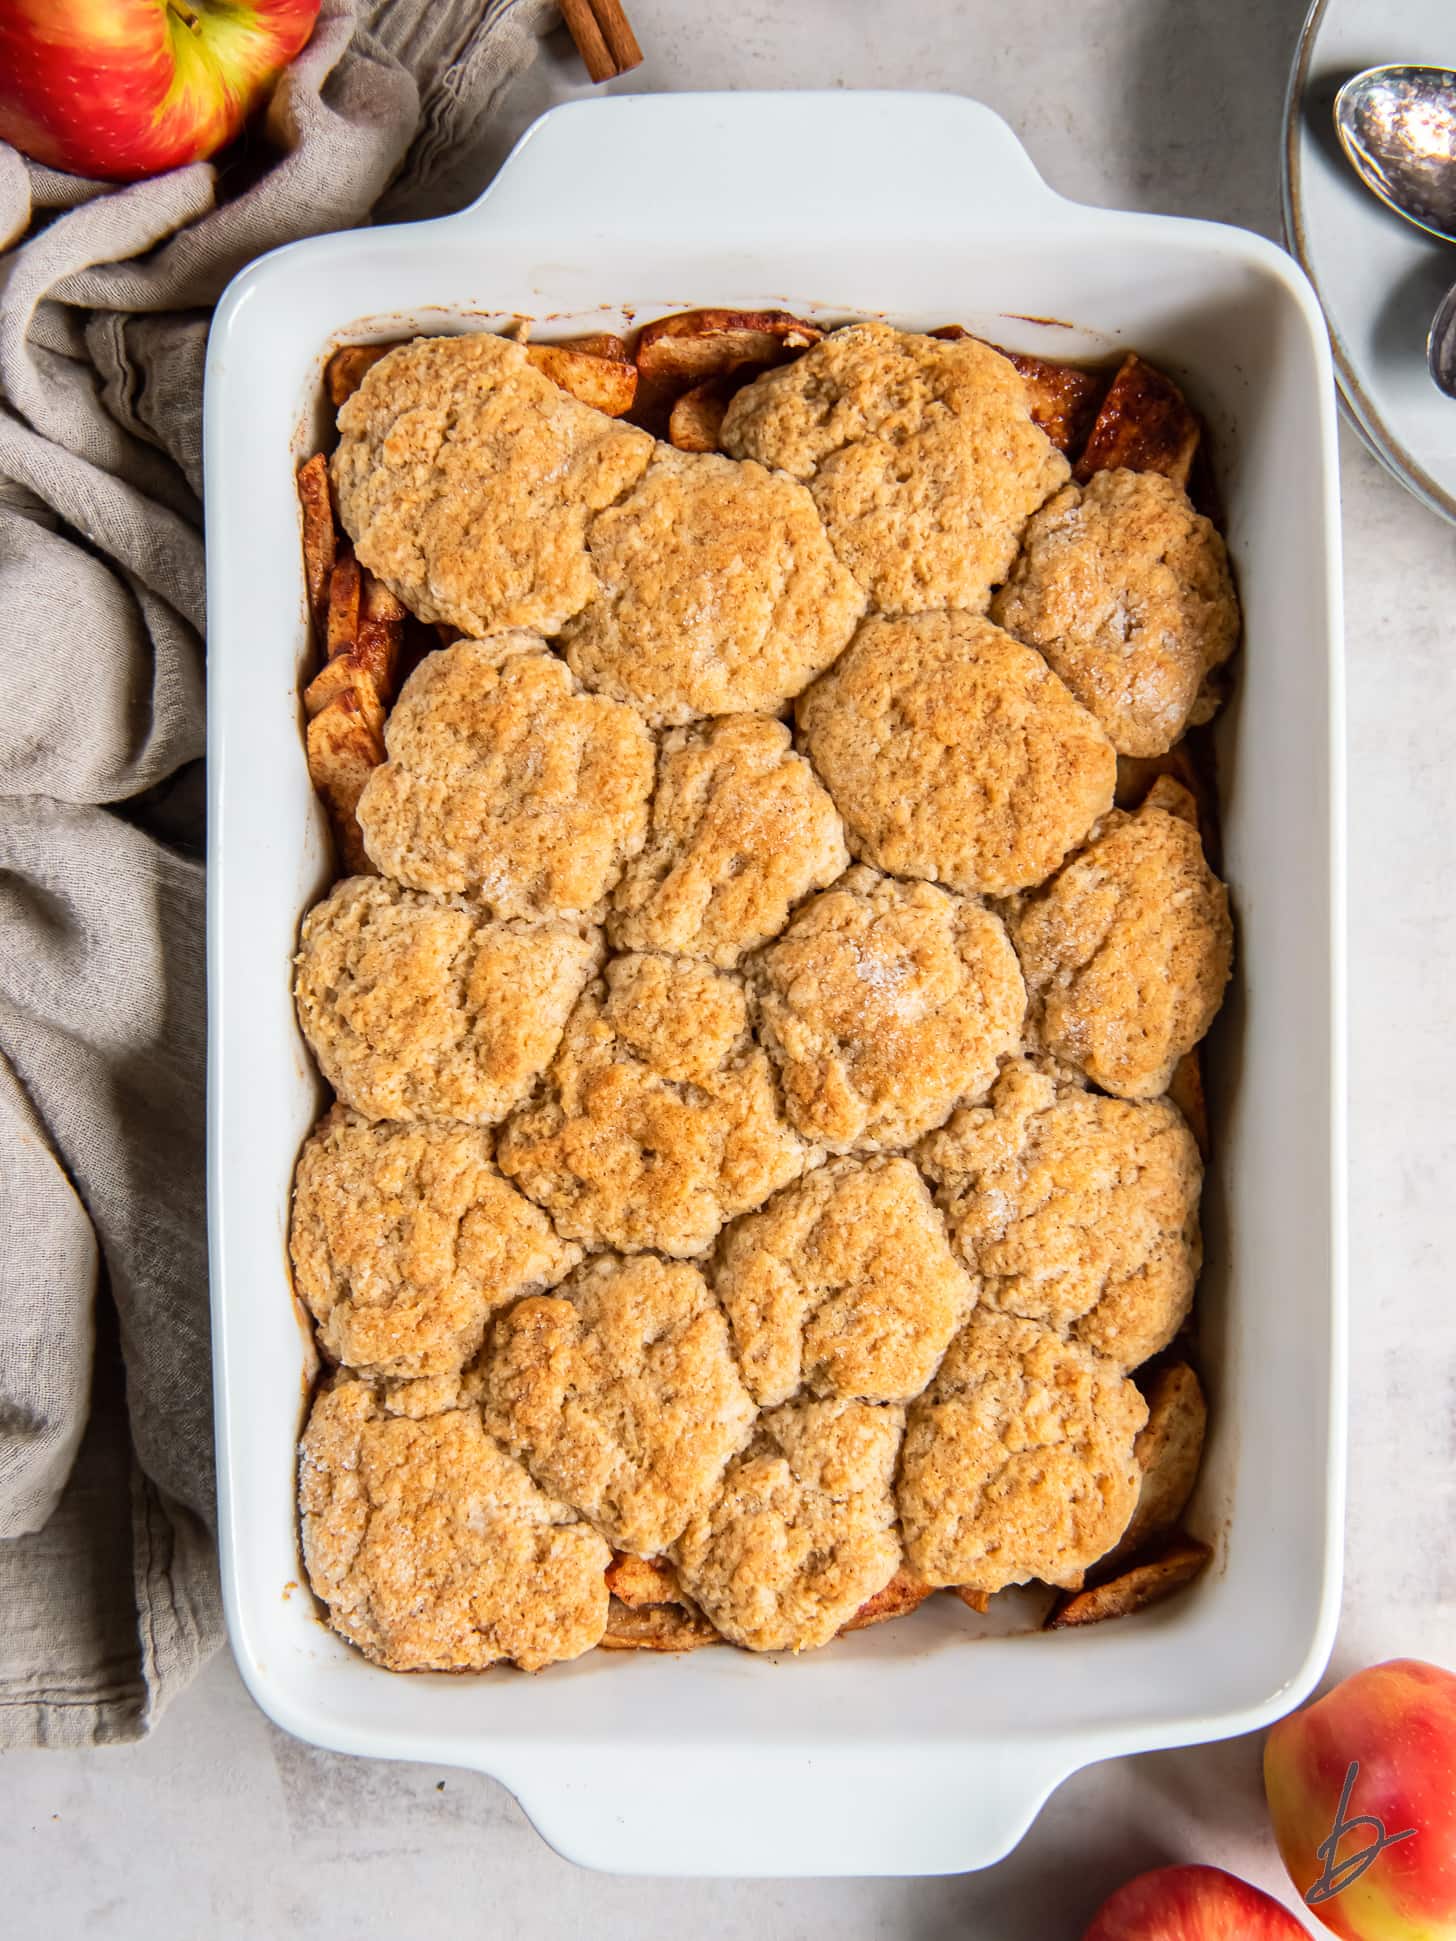 apple cobbler with biscuit topping in a baking dish.